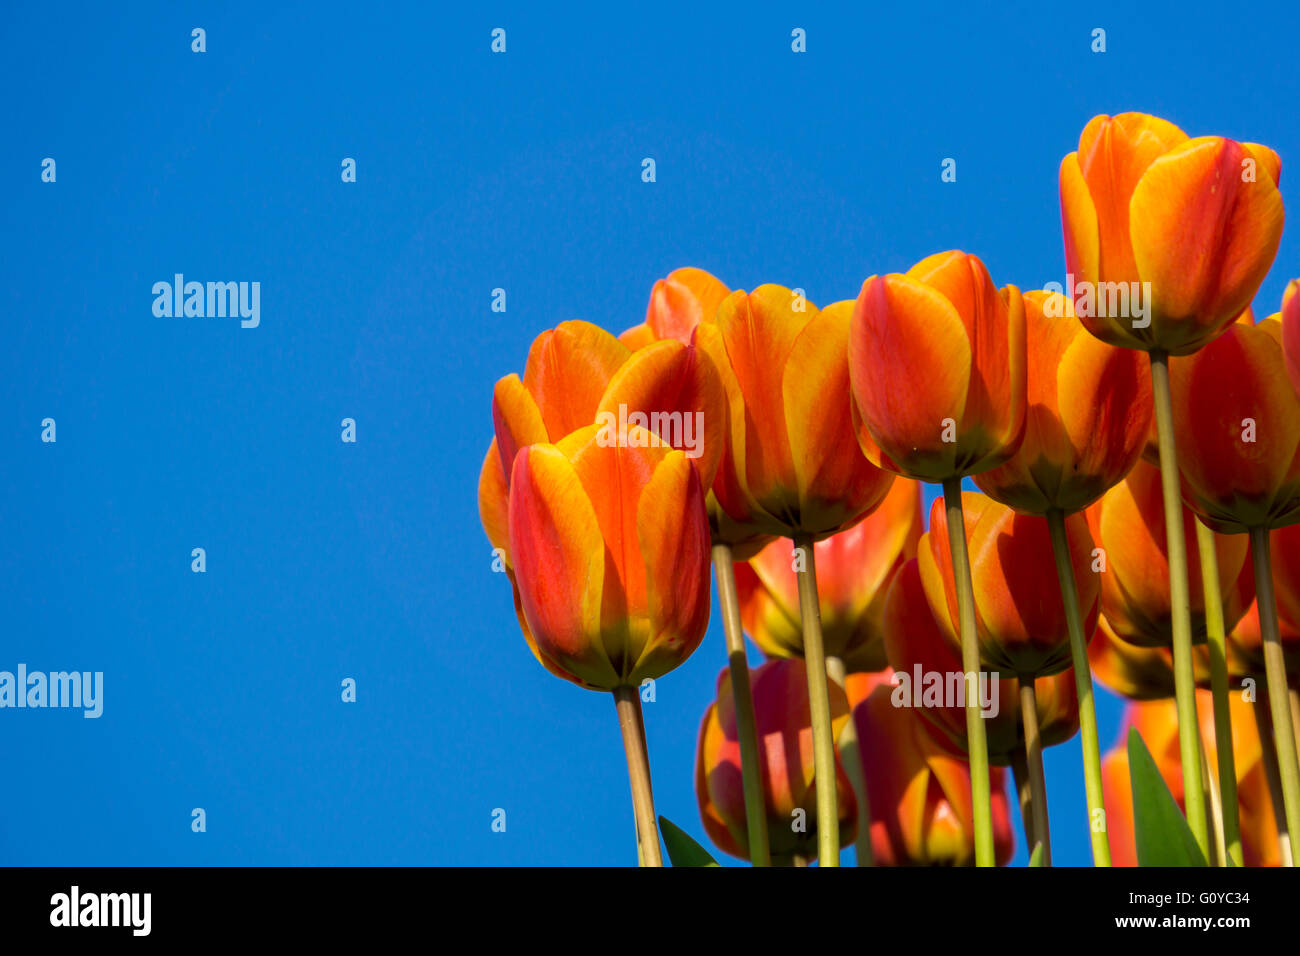 orange tulips seen from a bottom-up perspective having the sky as a blue background Stock Photo